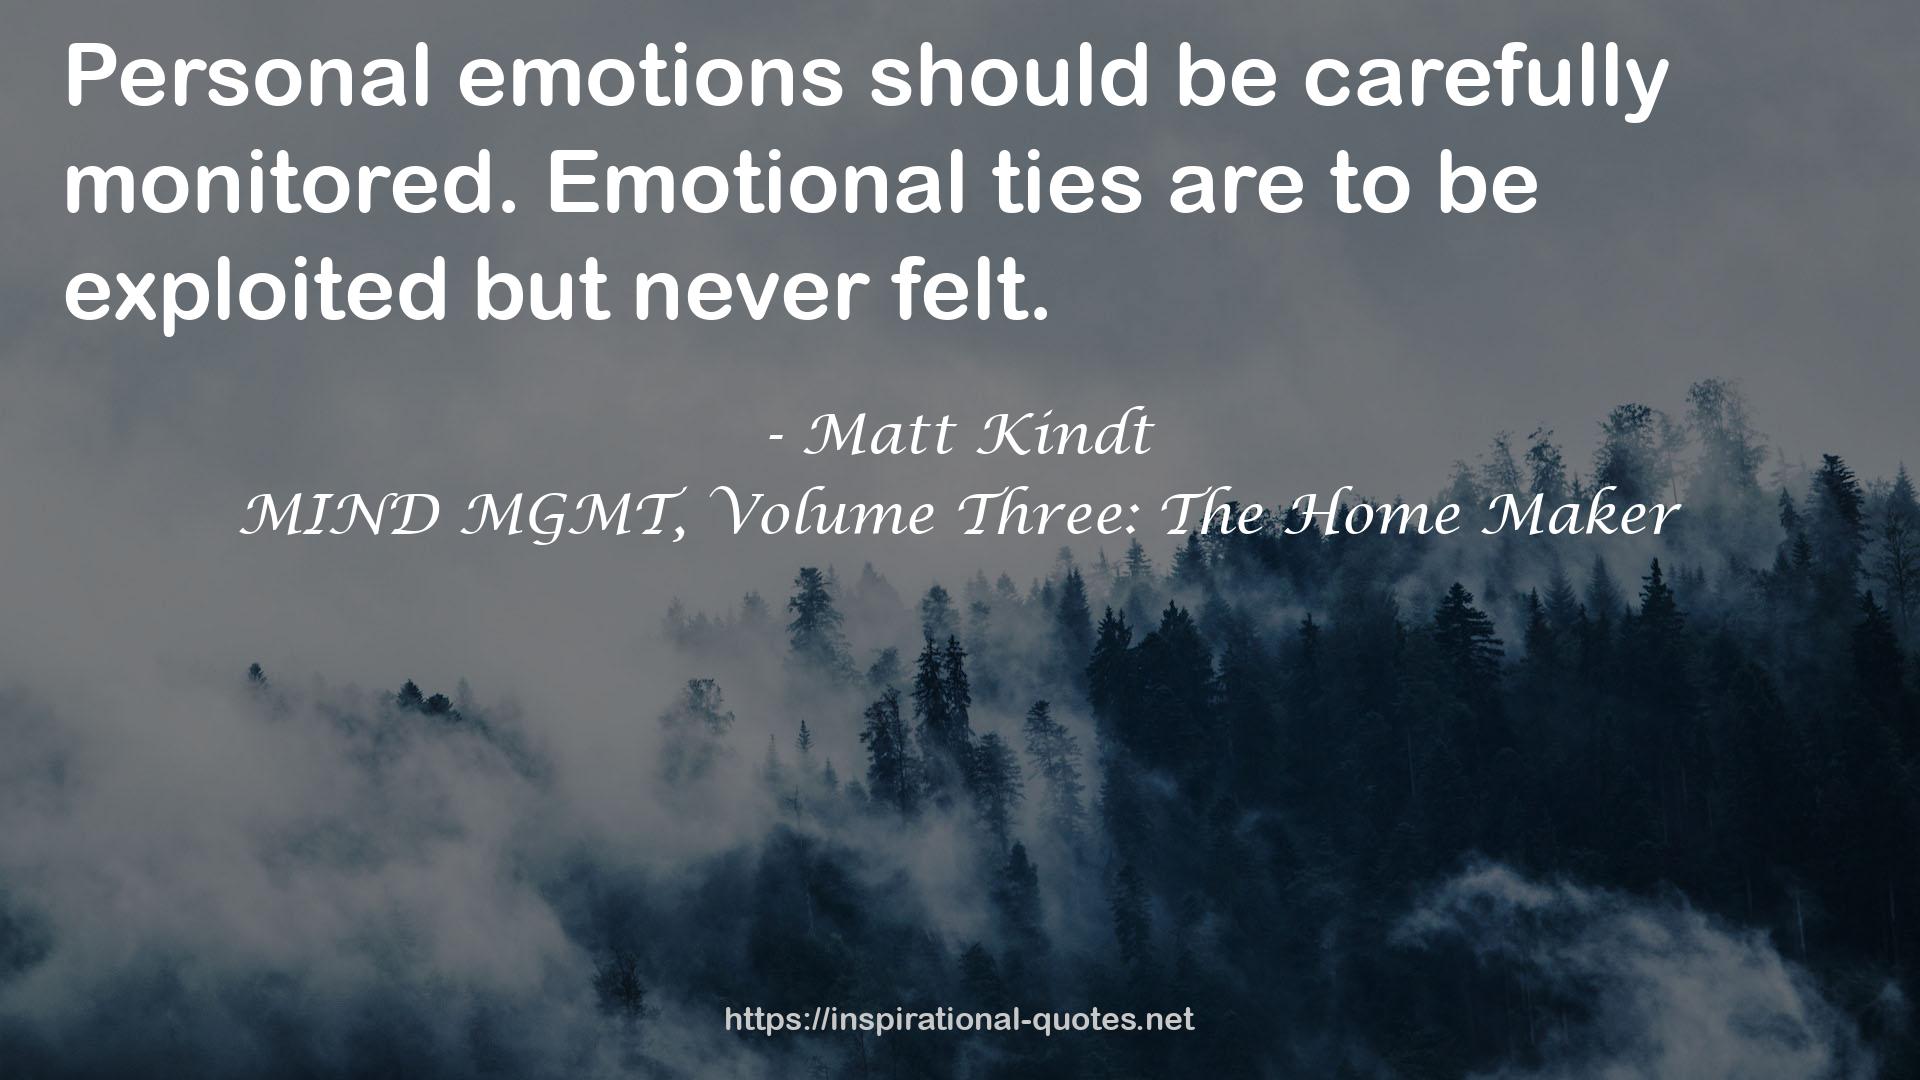 Emotional ties  QUOTES